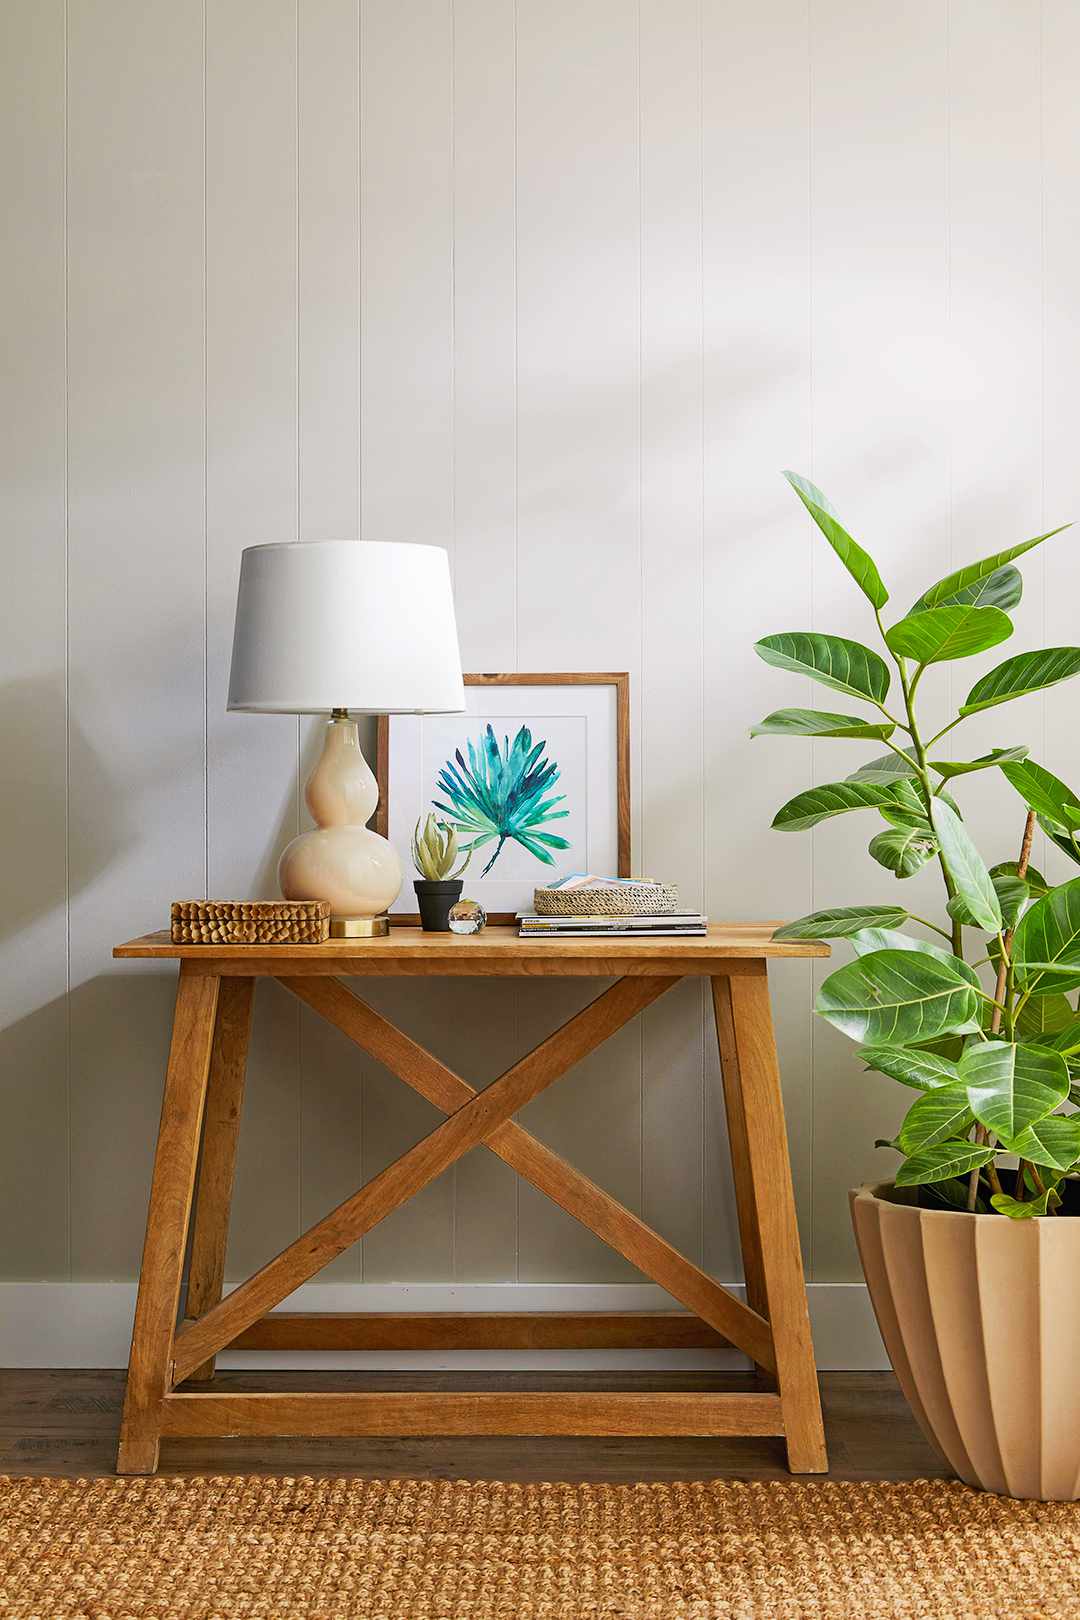 table and plant in front of painted wood paneling wall